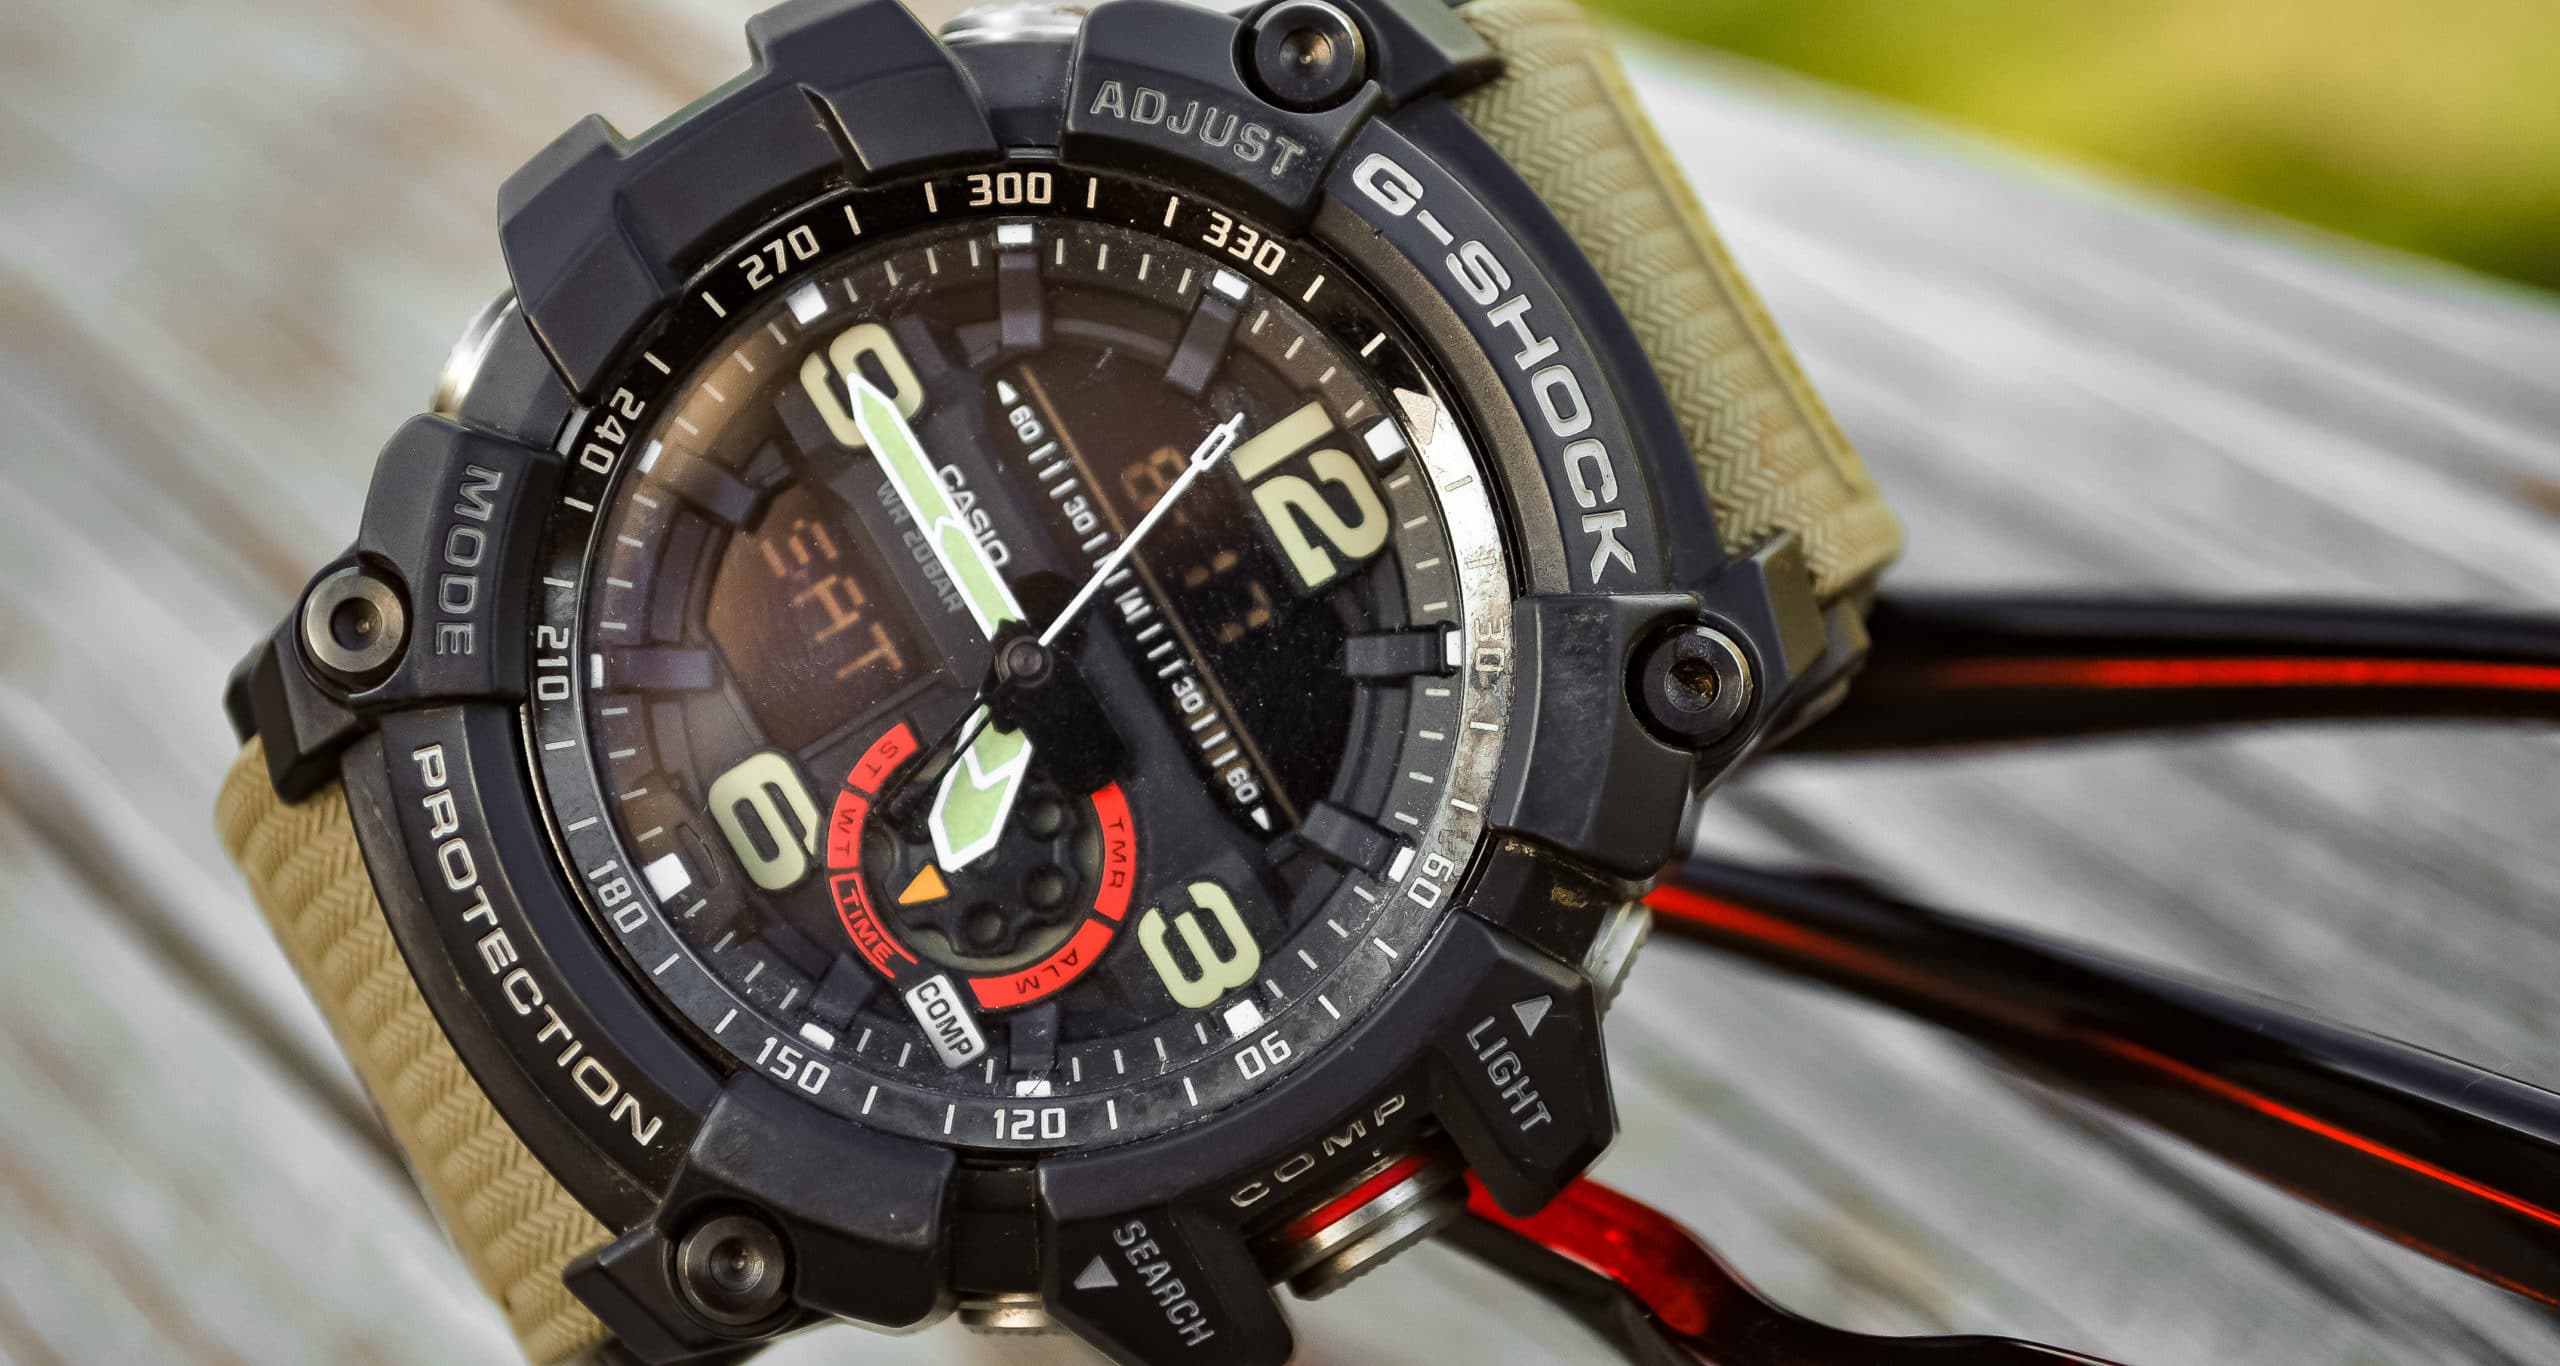 A Casio G Shock Mudmaster Reivew Over The Long Haul